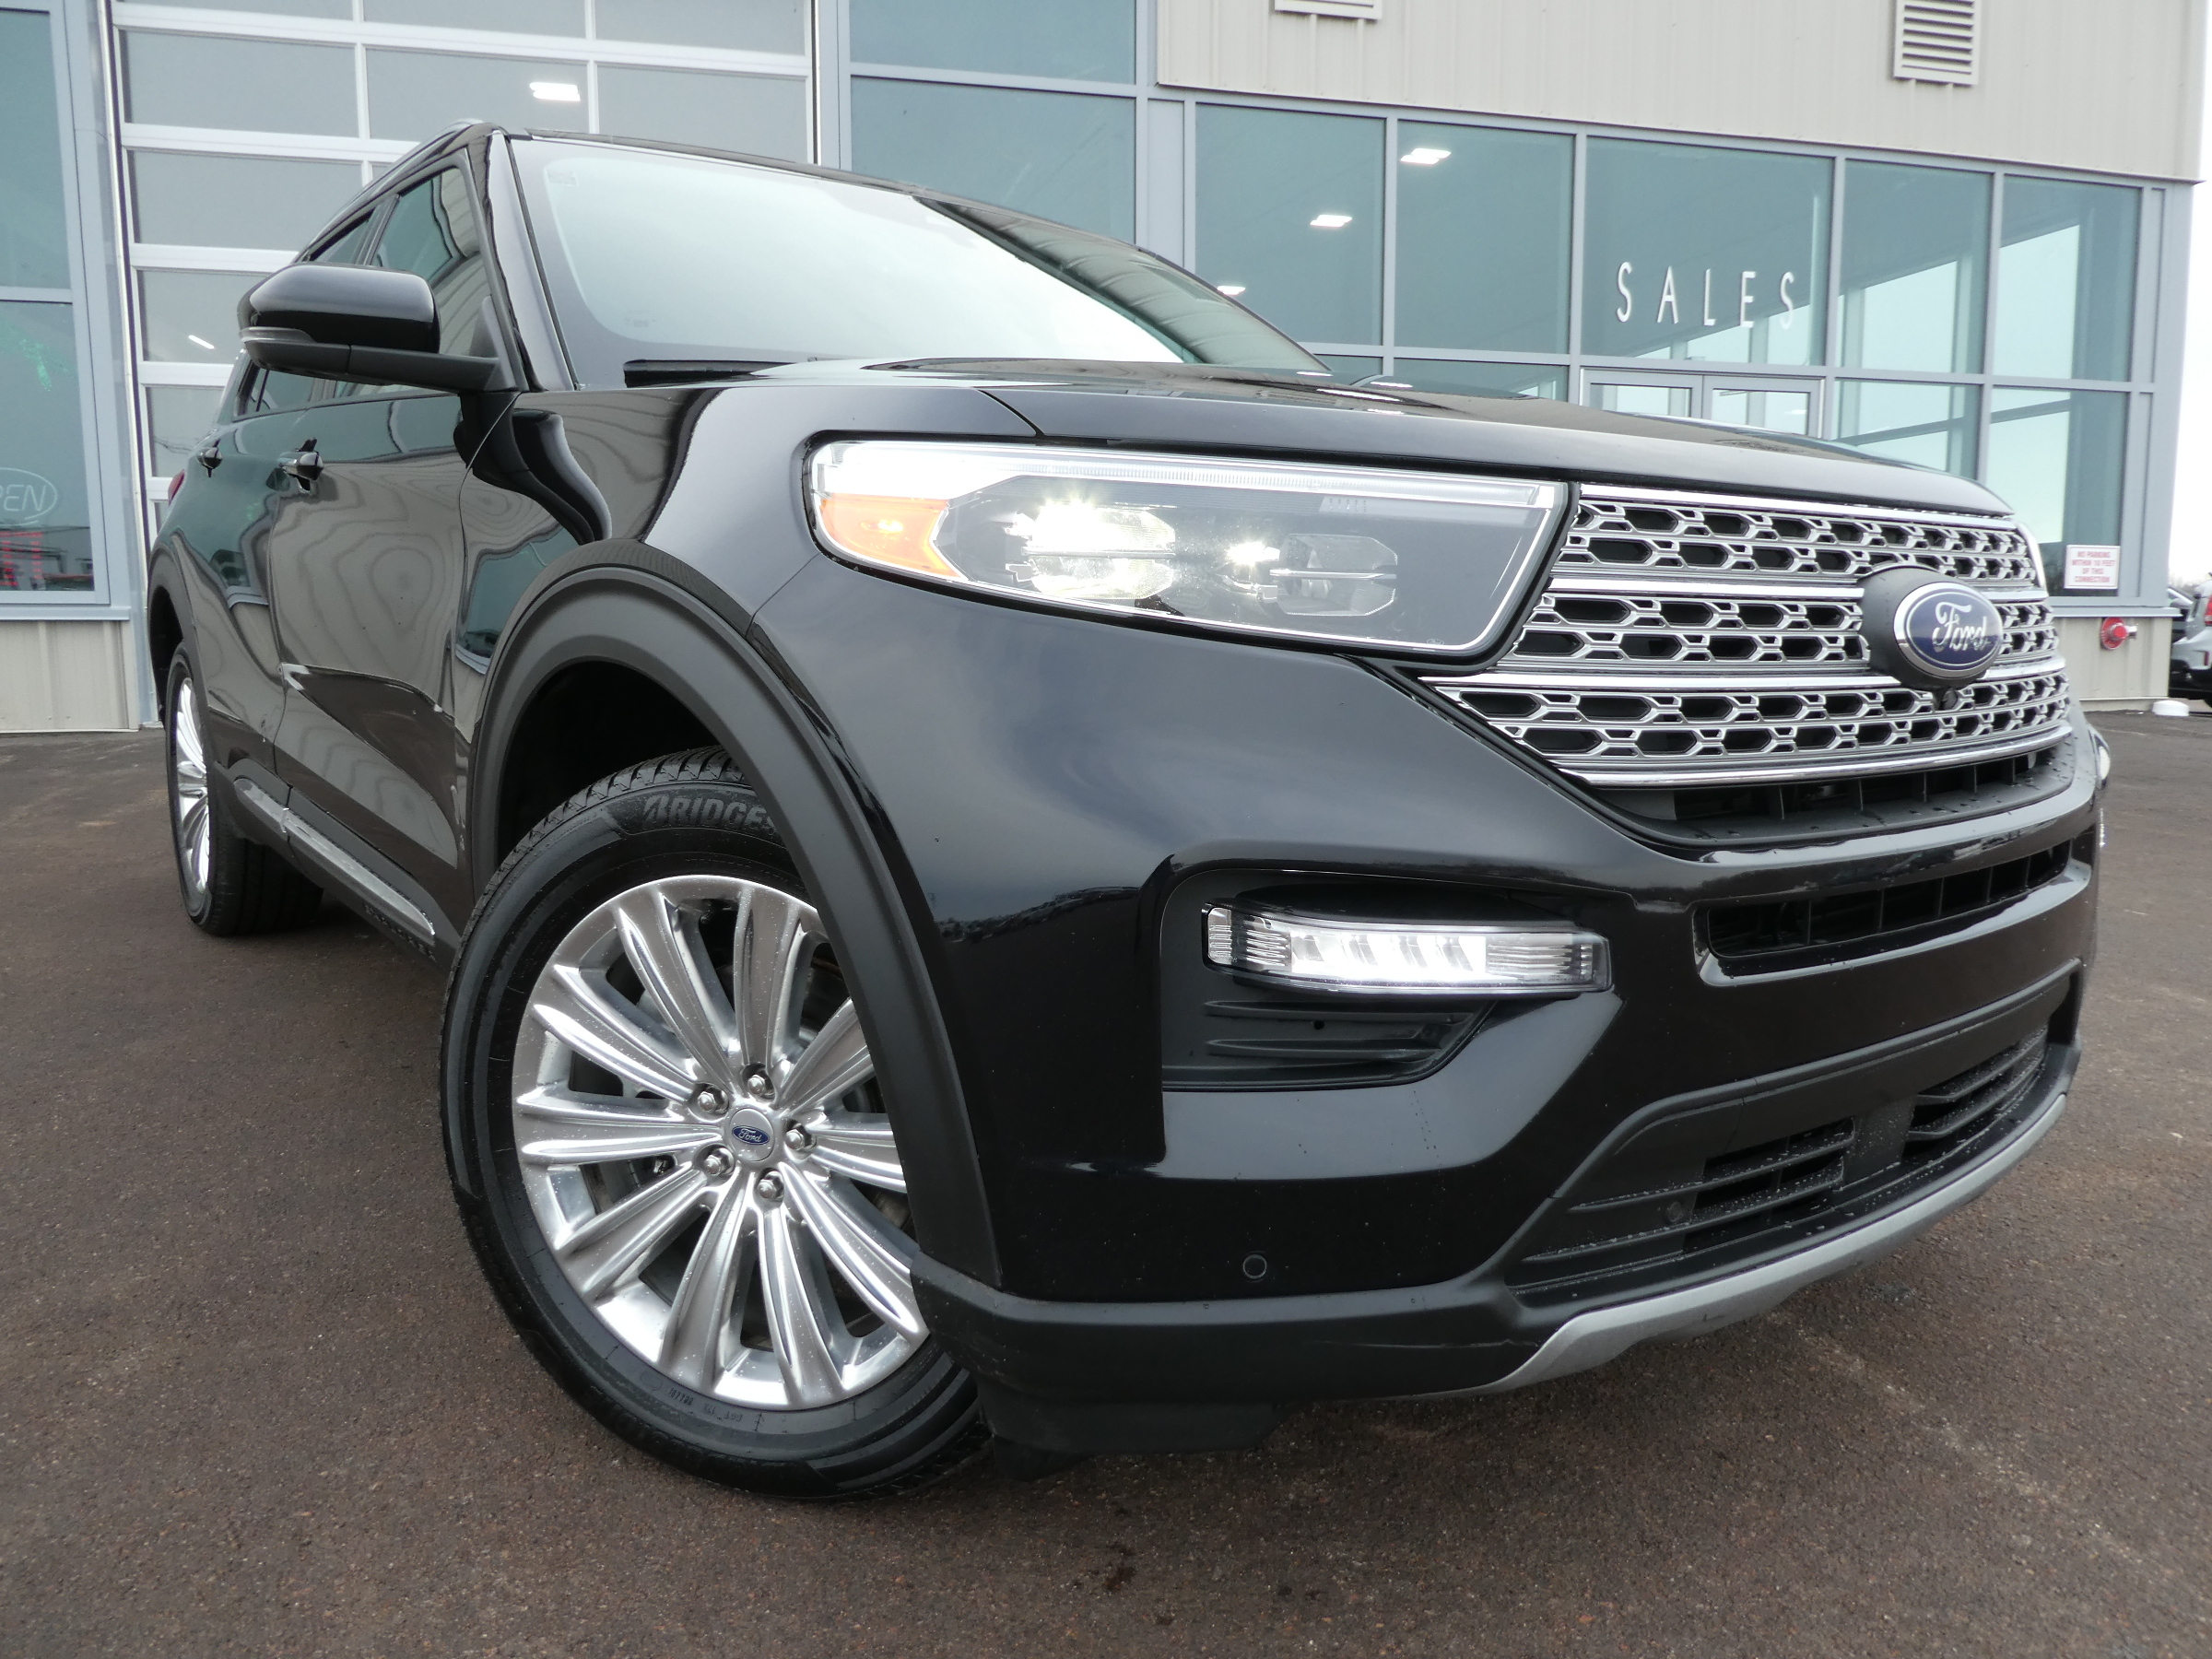 2021 Ford Explorer Heated Leather, Sunroof, Nav, 7 Pass. AC Seats